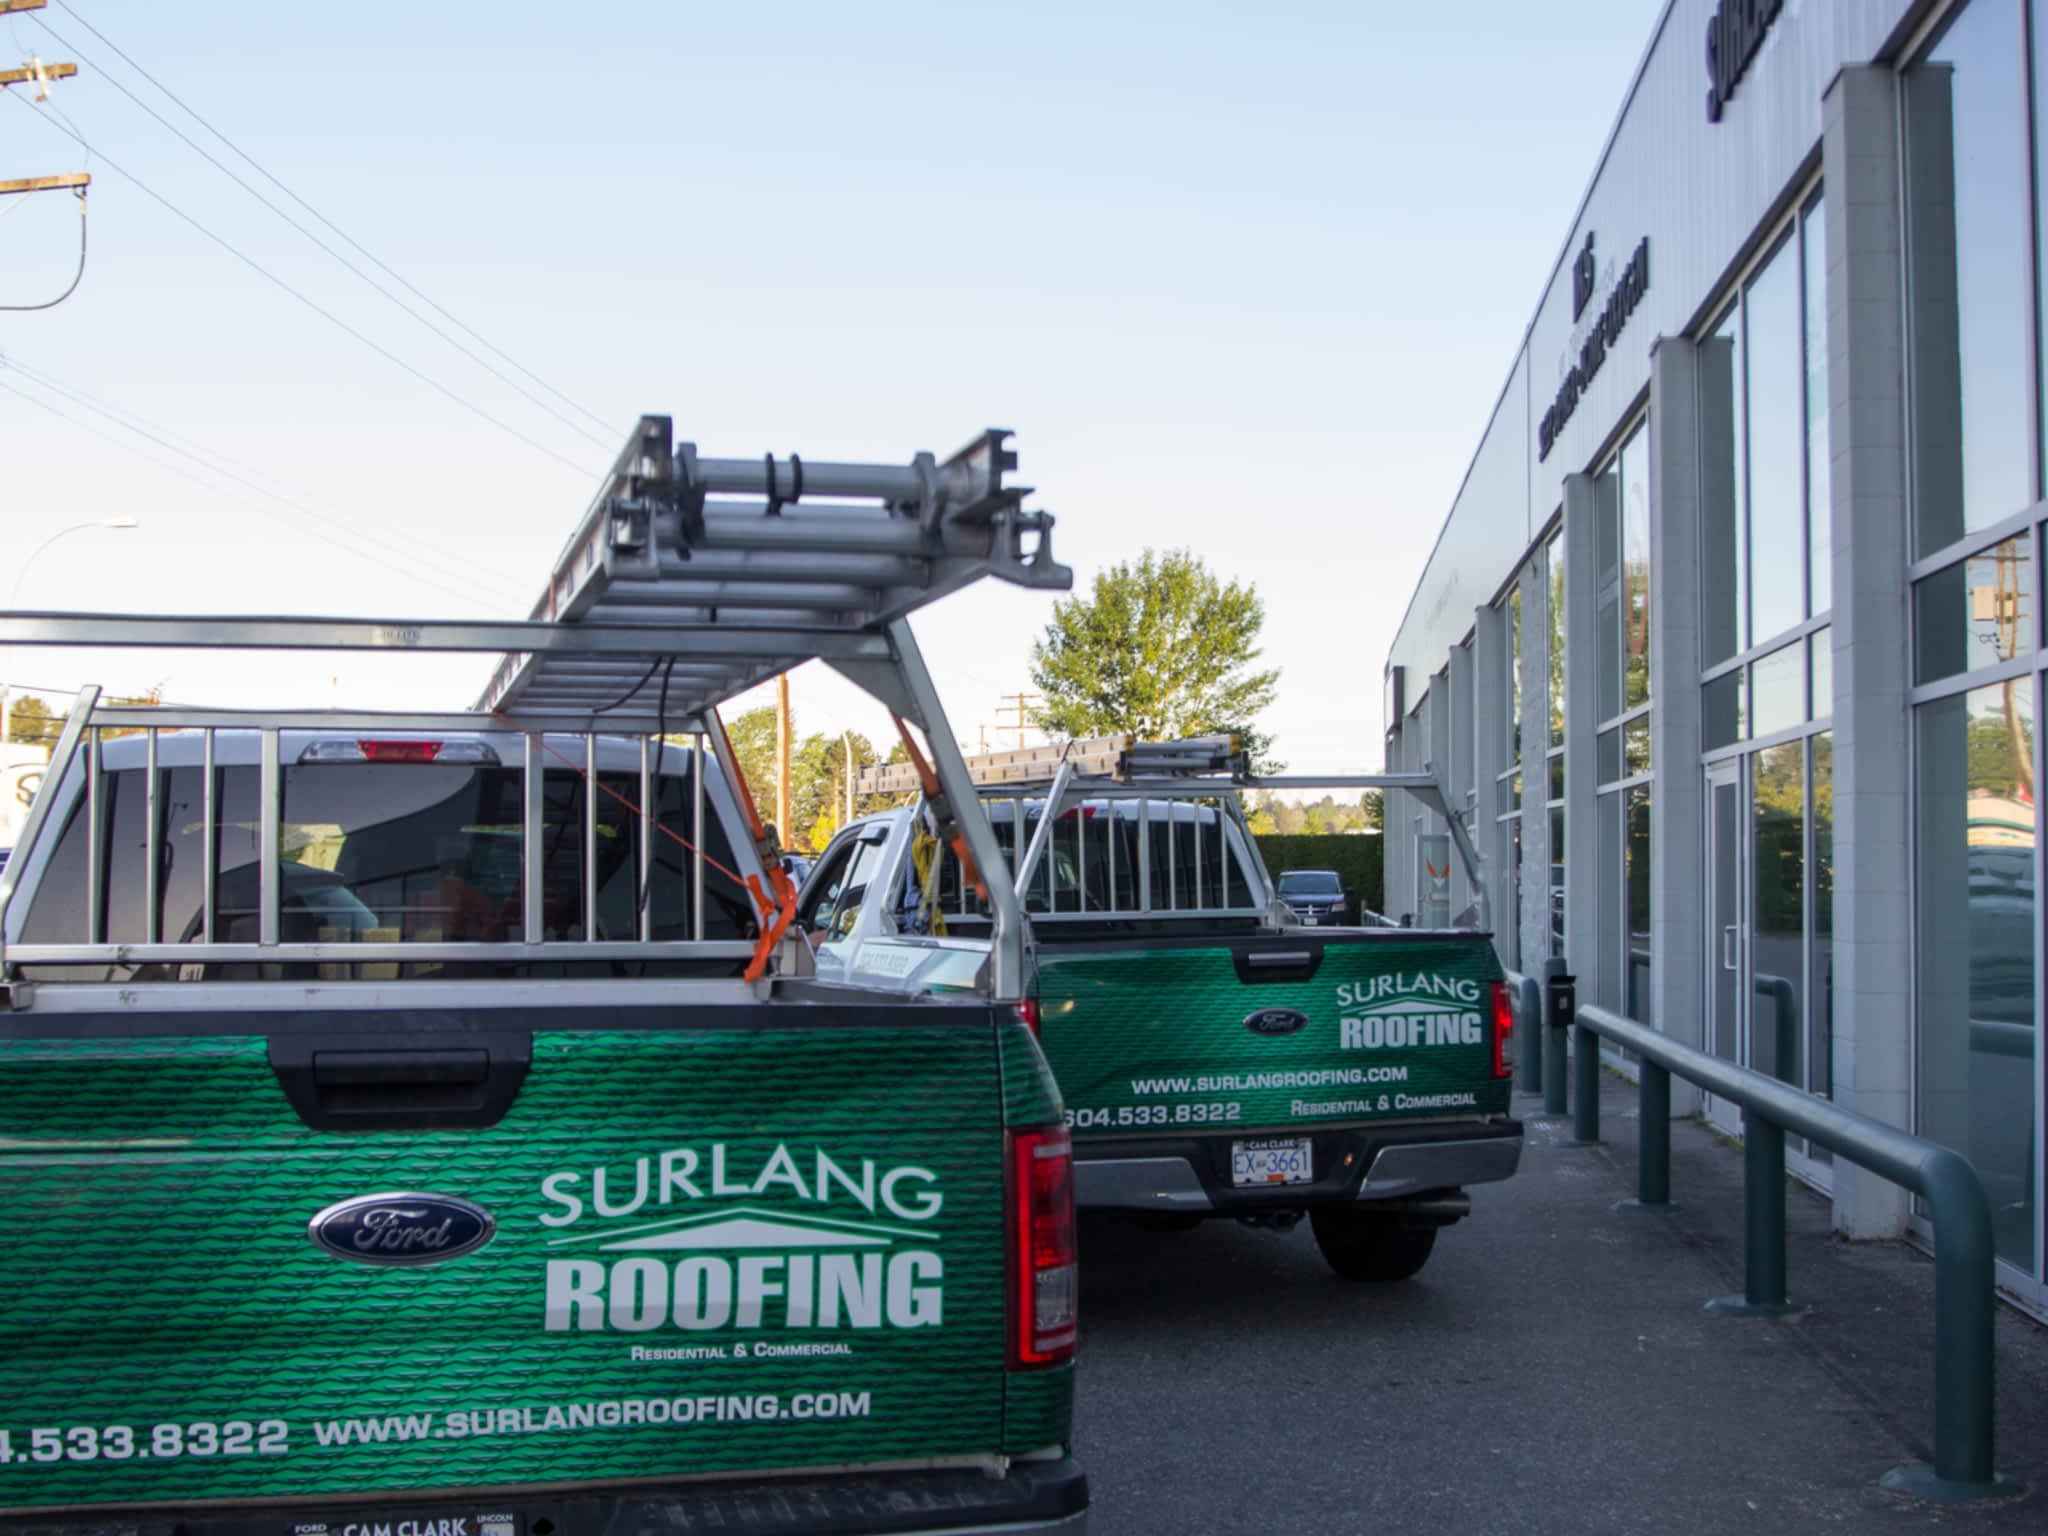 photo Surlang Roofing Ltd